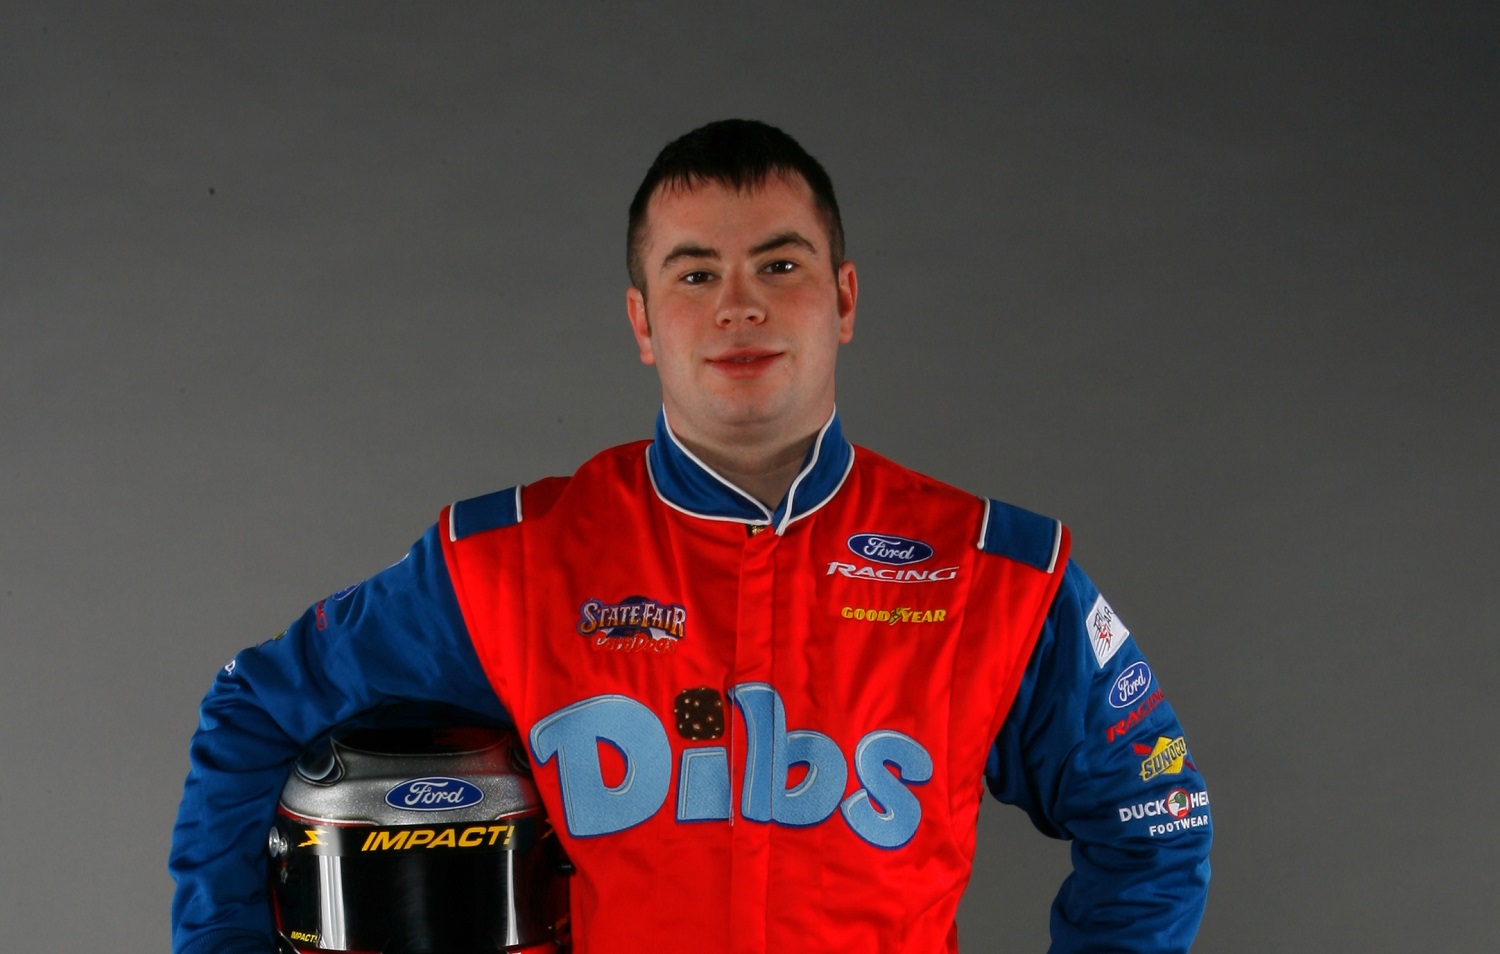 Bobby East, driver of the No. 21 Ford during the NASCAR Craftsman Truck Series media day at Daytona International Speedway on Feb. 9, 2006. | Rusty Jarrett/Getty Images